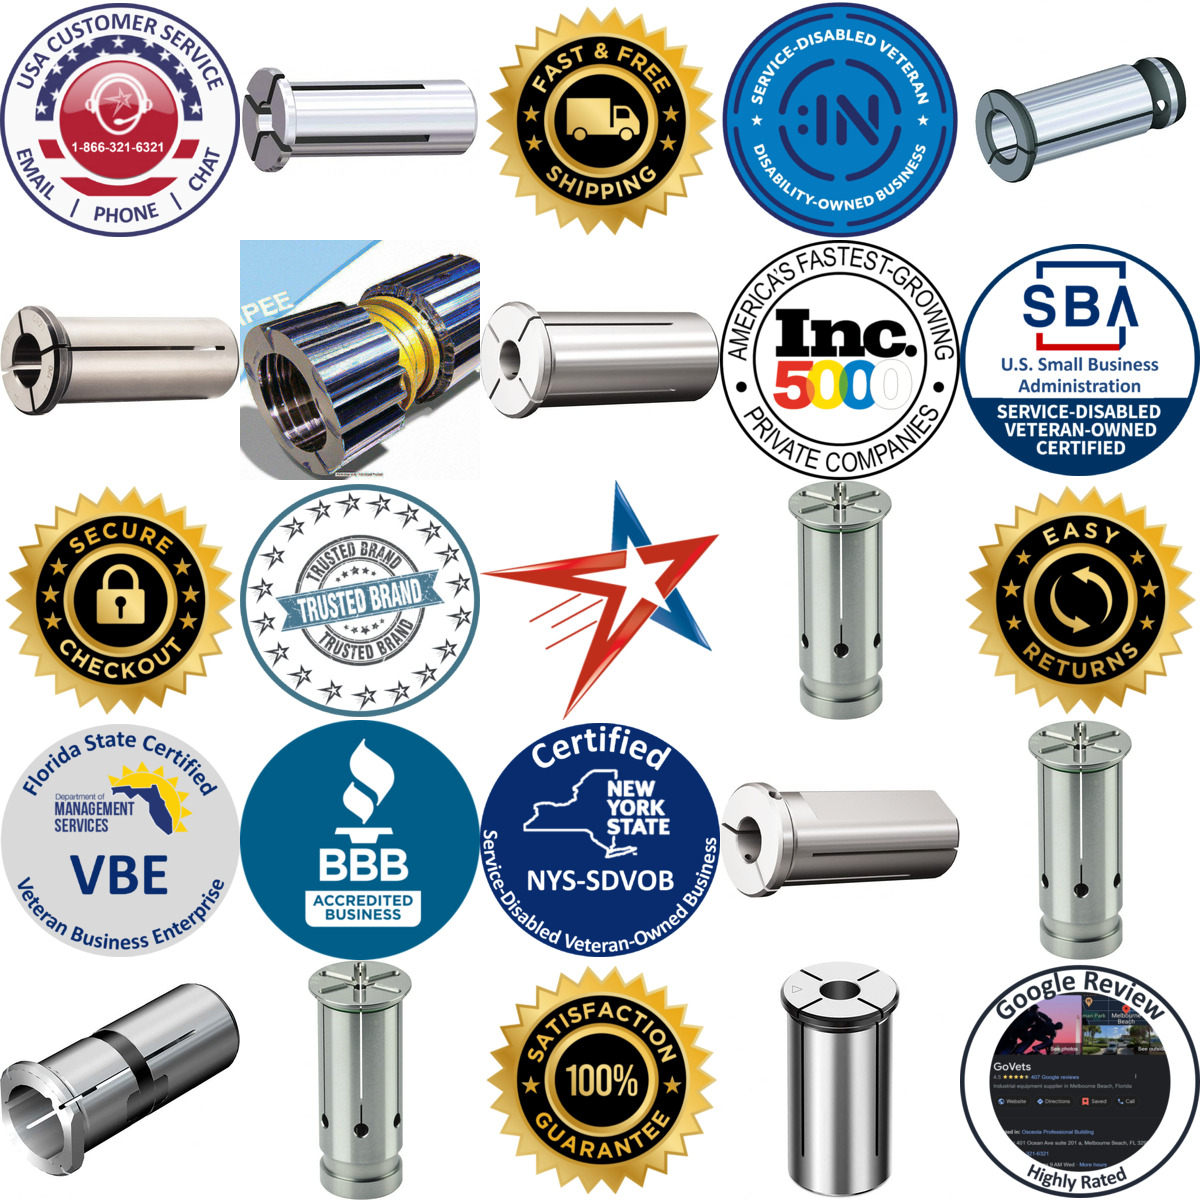 A selection of Hydraulic Chuck Sleeves products on GoVets